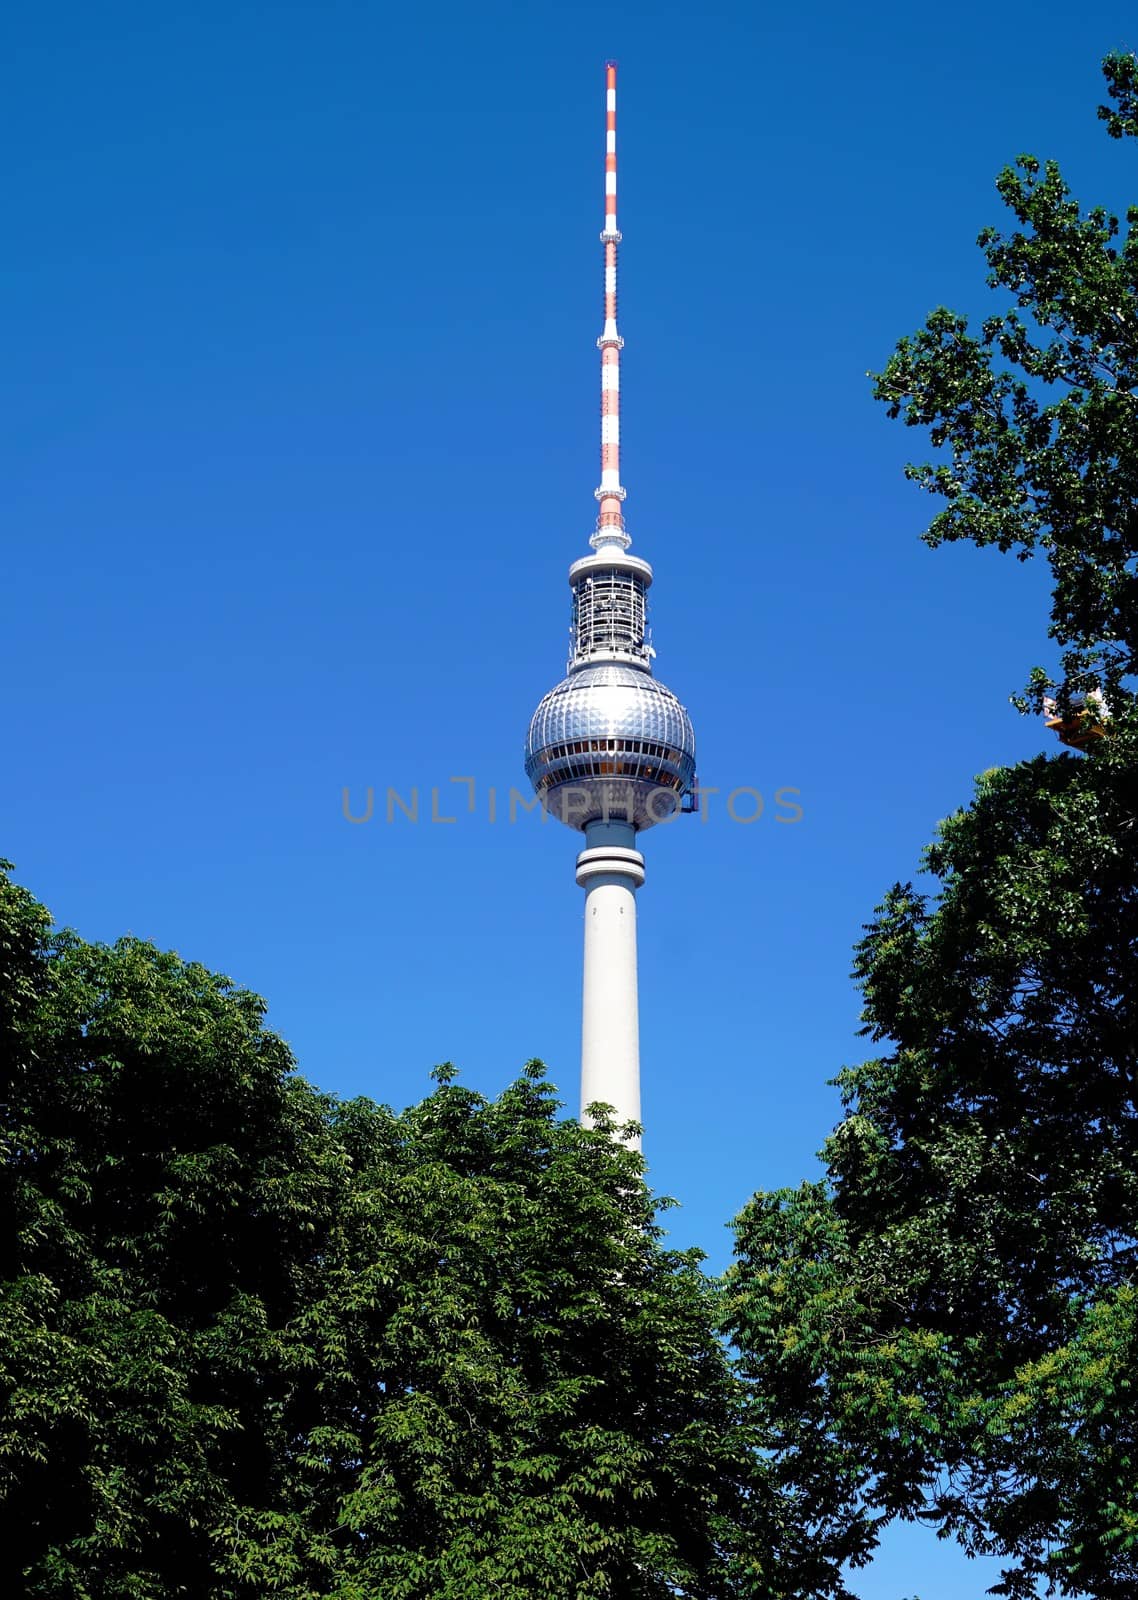 Berlin television tower behind trees in front of blue sky